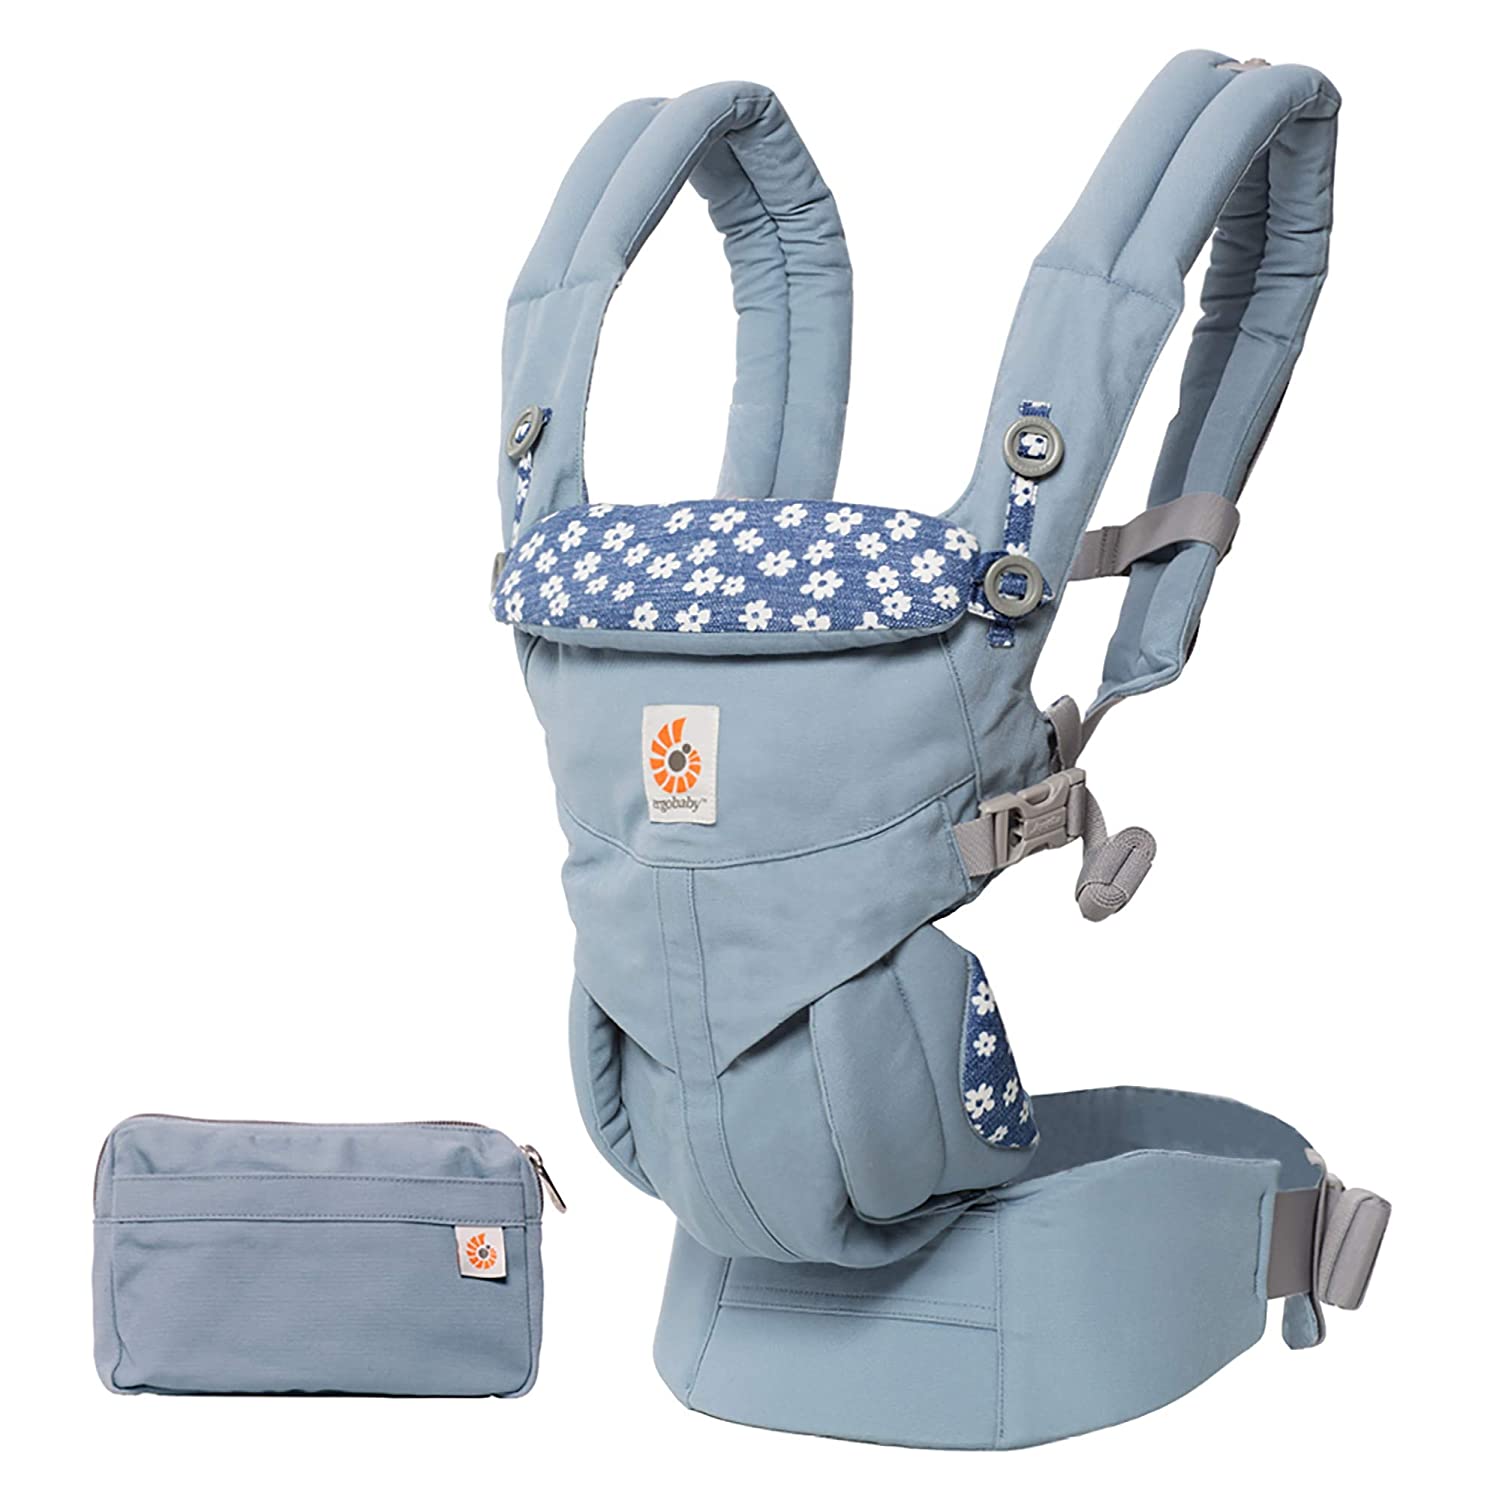 acbags.com Baby Carrier, Omni 360 All Carry Positions Baby Carrier, Blue Daisies